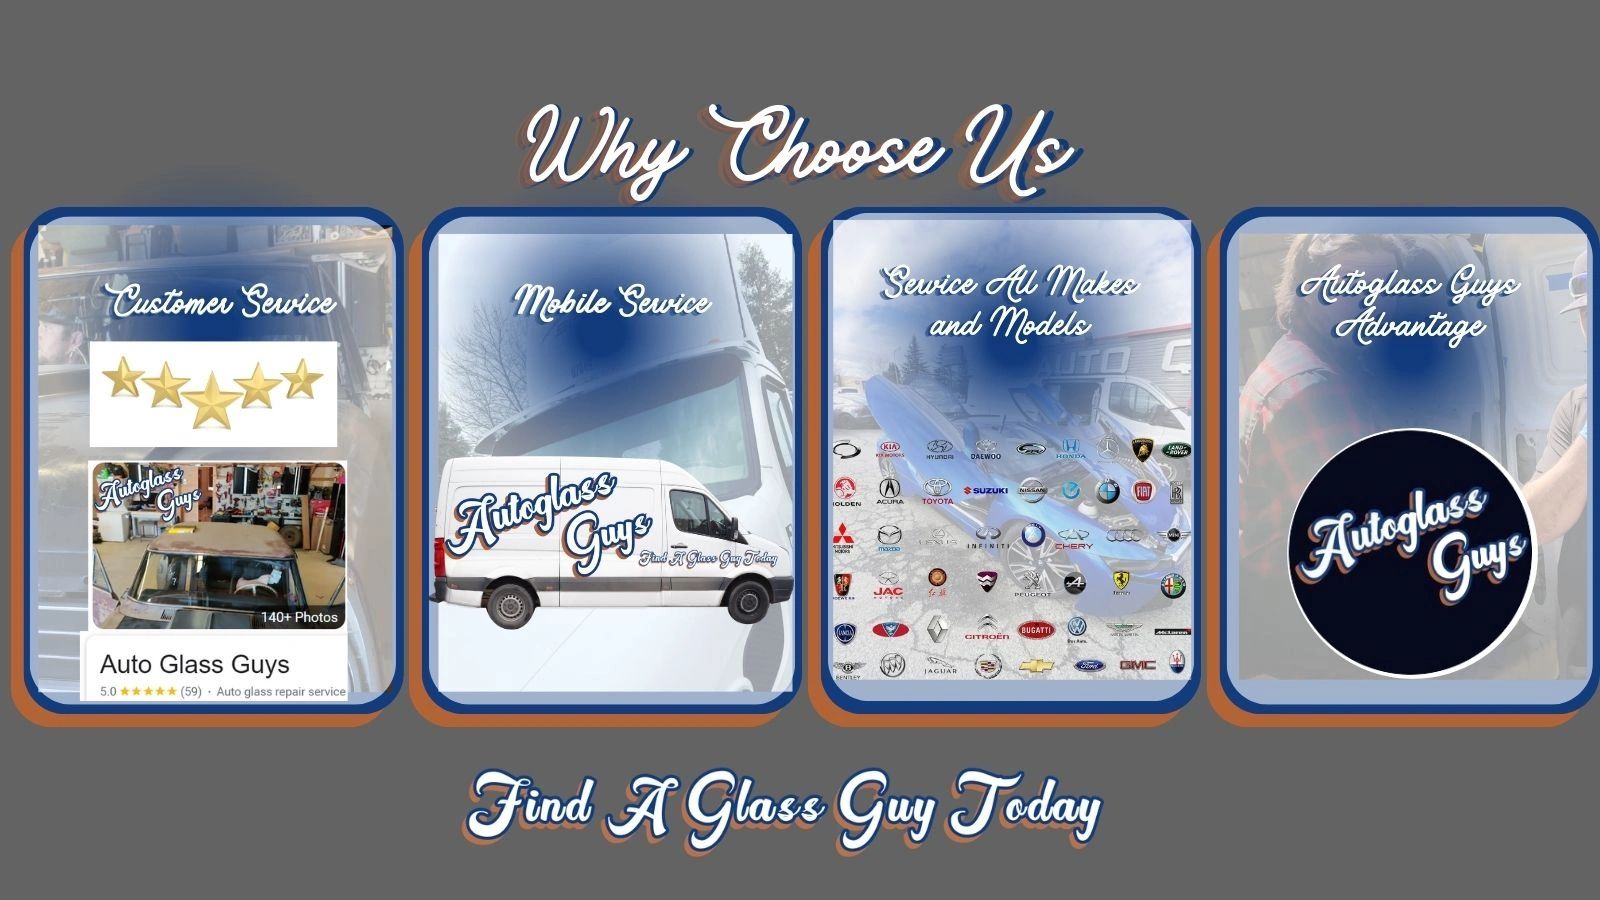 We provide service with care with mobile only autoglass in Pierce County, serving all make vehicles.